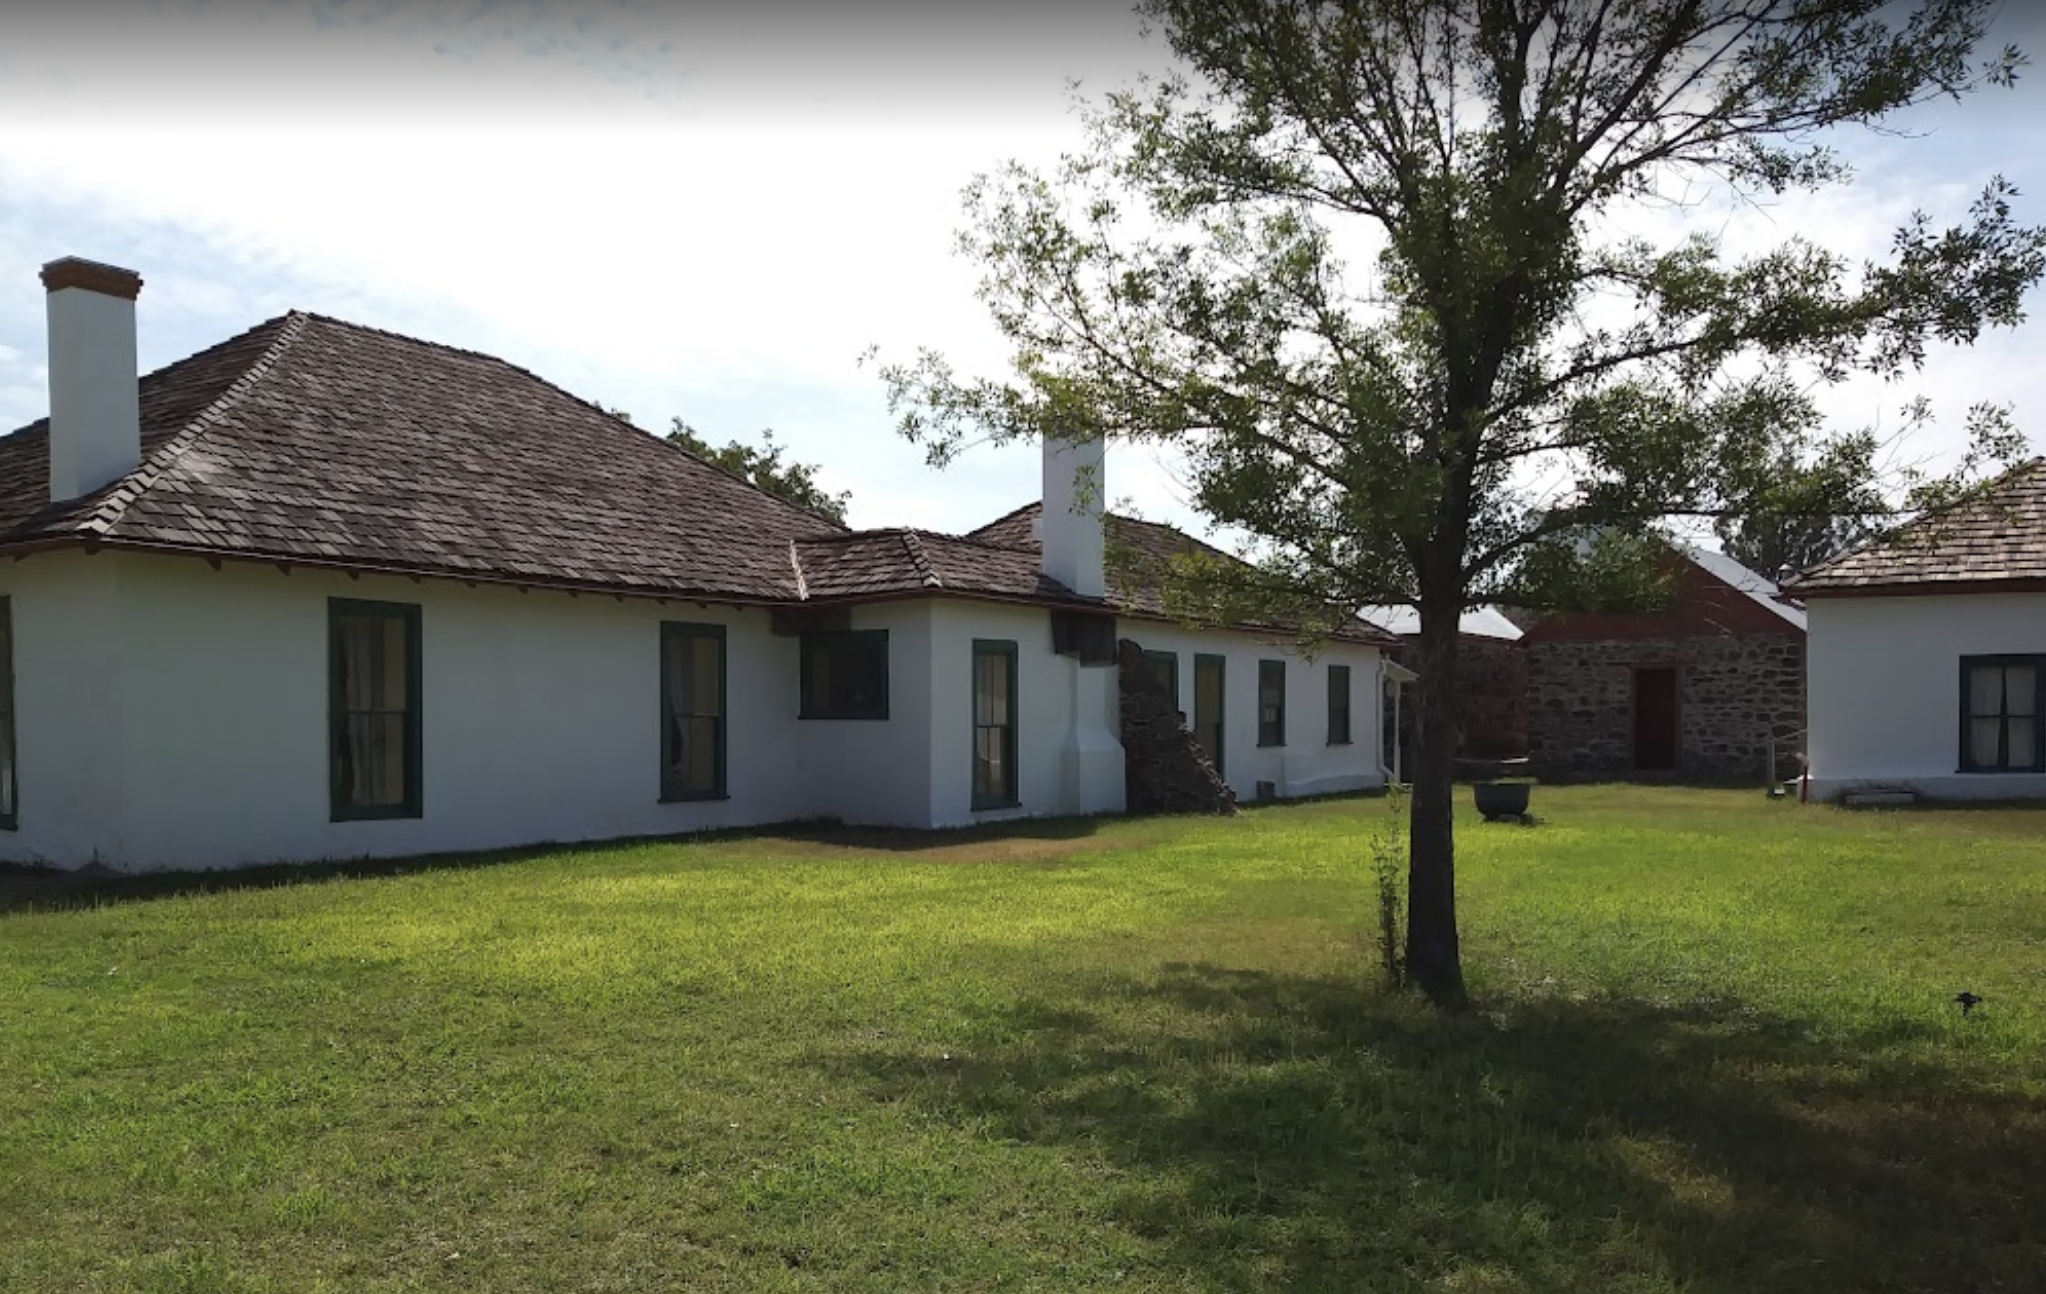 Pancho Villa Resupplied Troops at this Now Historic Ranch During the Mexican Revolution nuestro stories